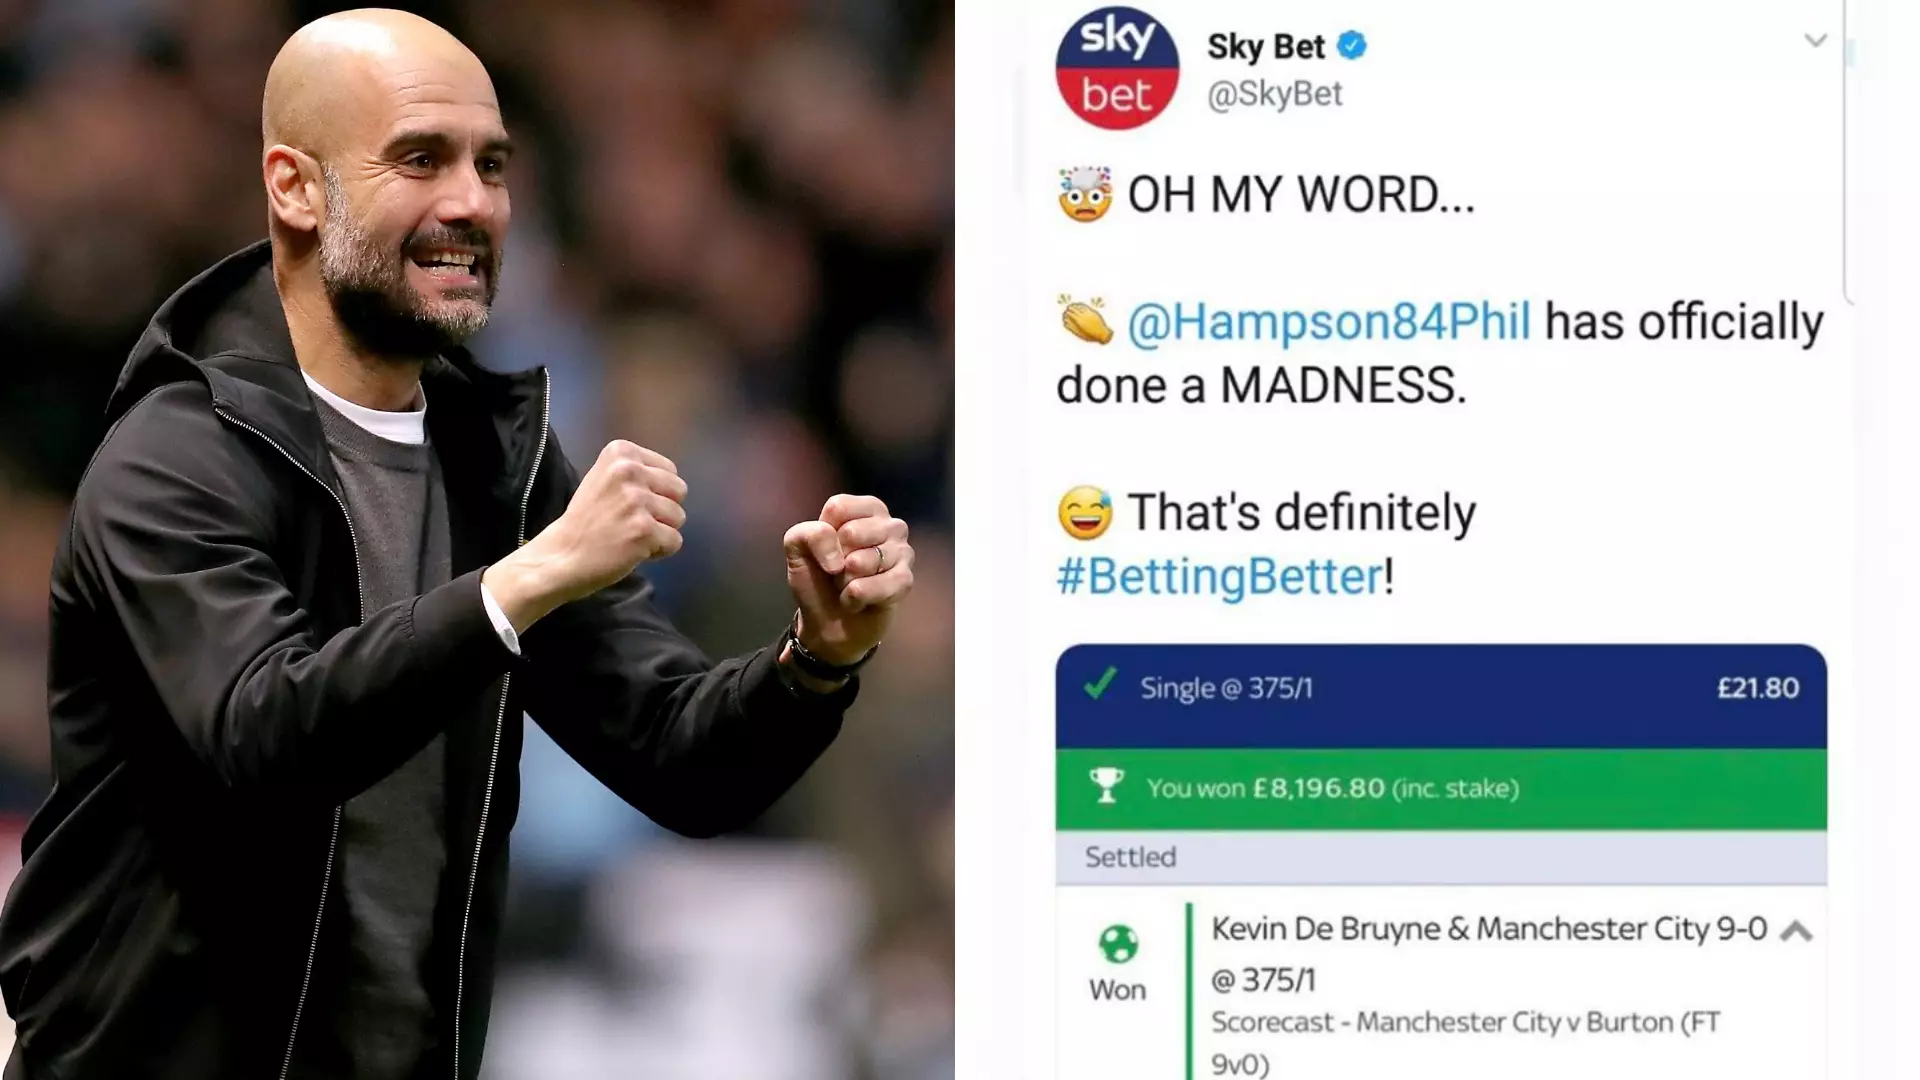 Punter Wins Outrageous Bet After Predicting City's 9-0 Win, De Bruyne To Score First